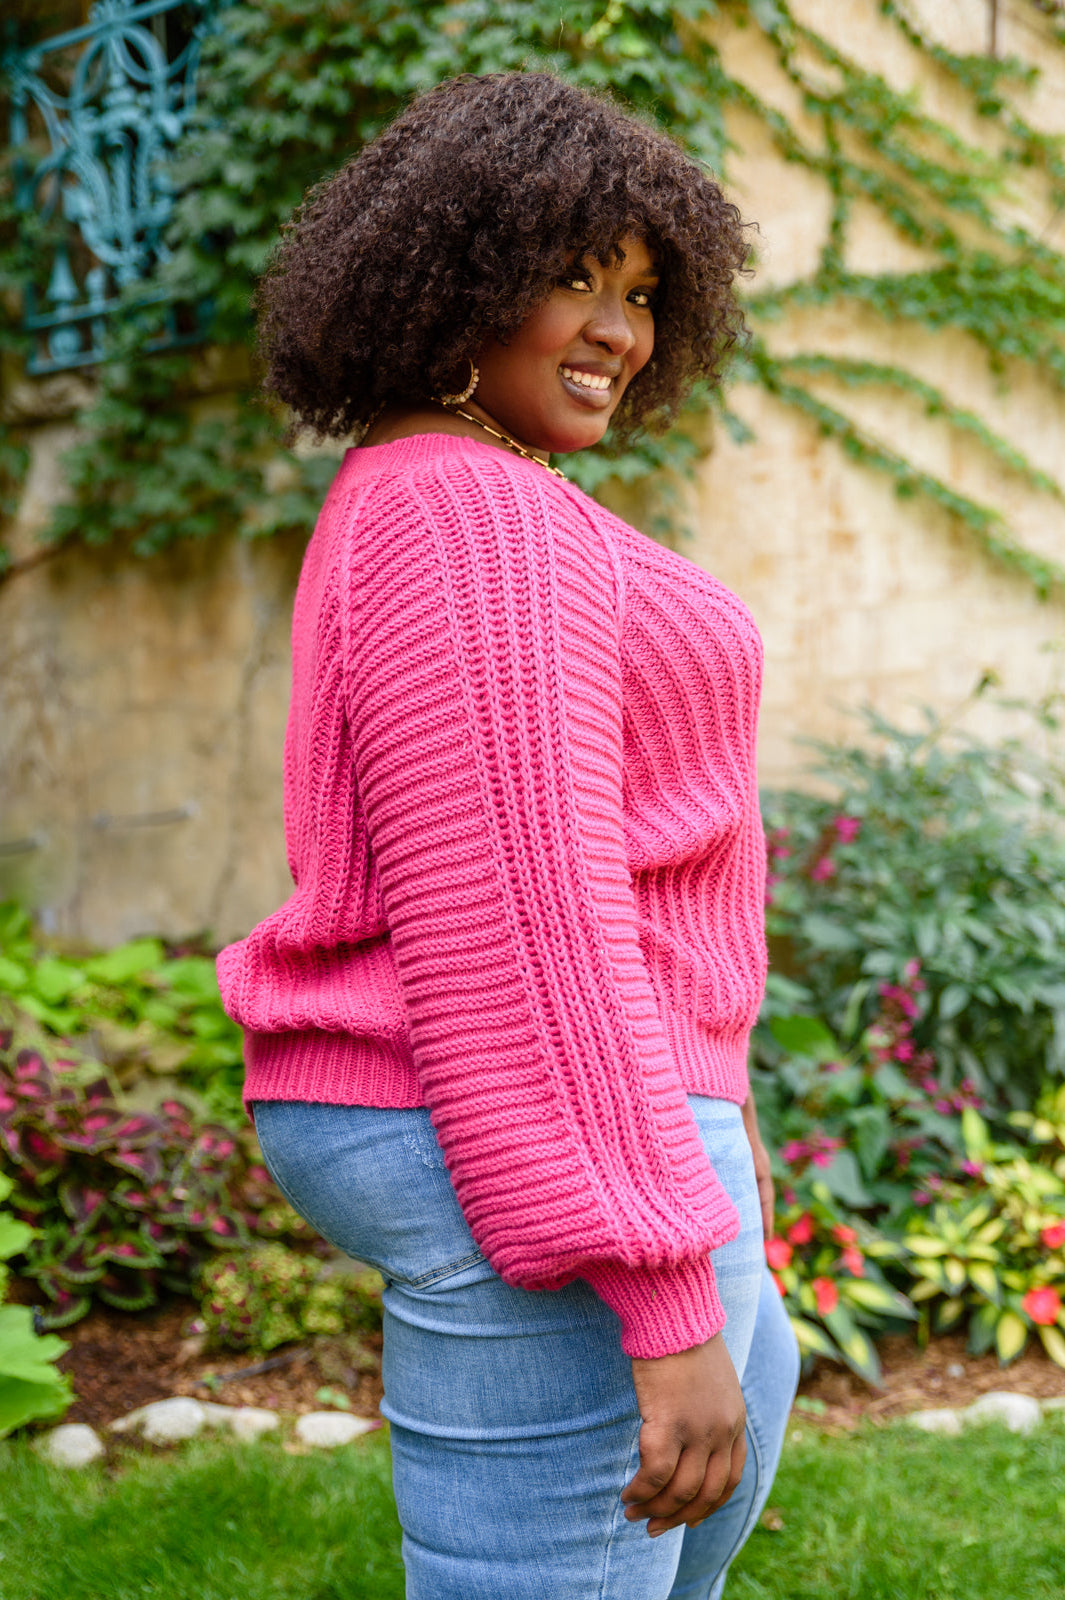 Claim The Stage Knit Sweater In Hot Pink Ave Shops